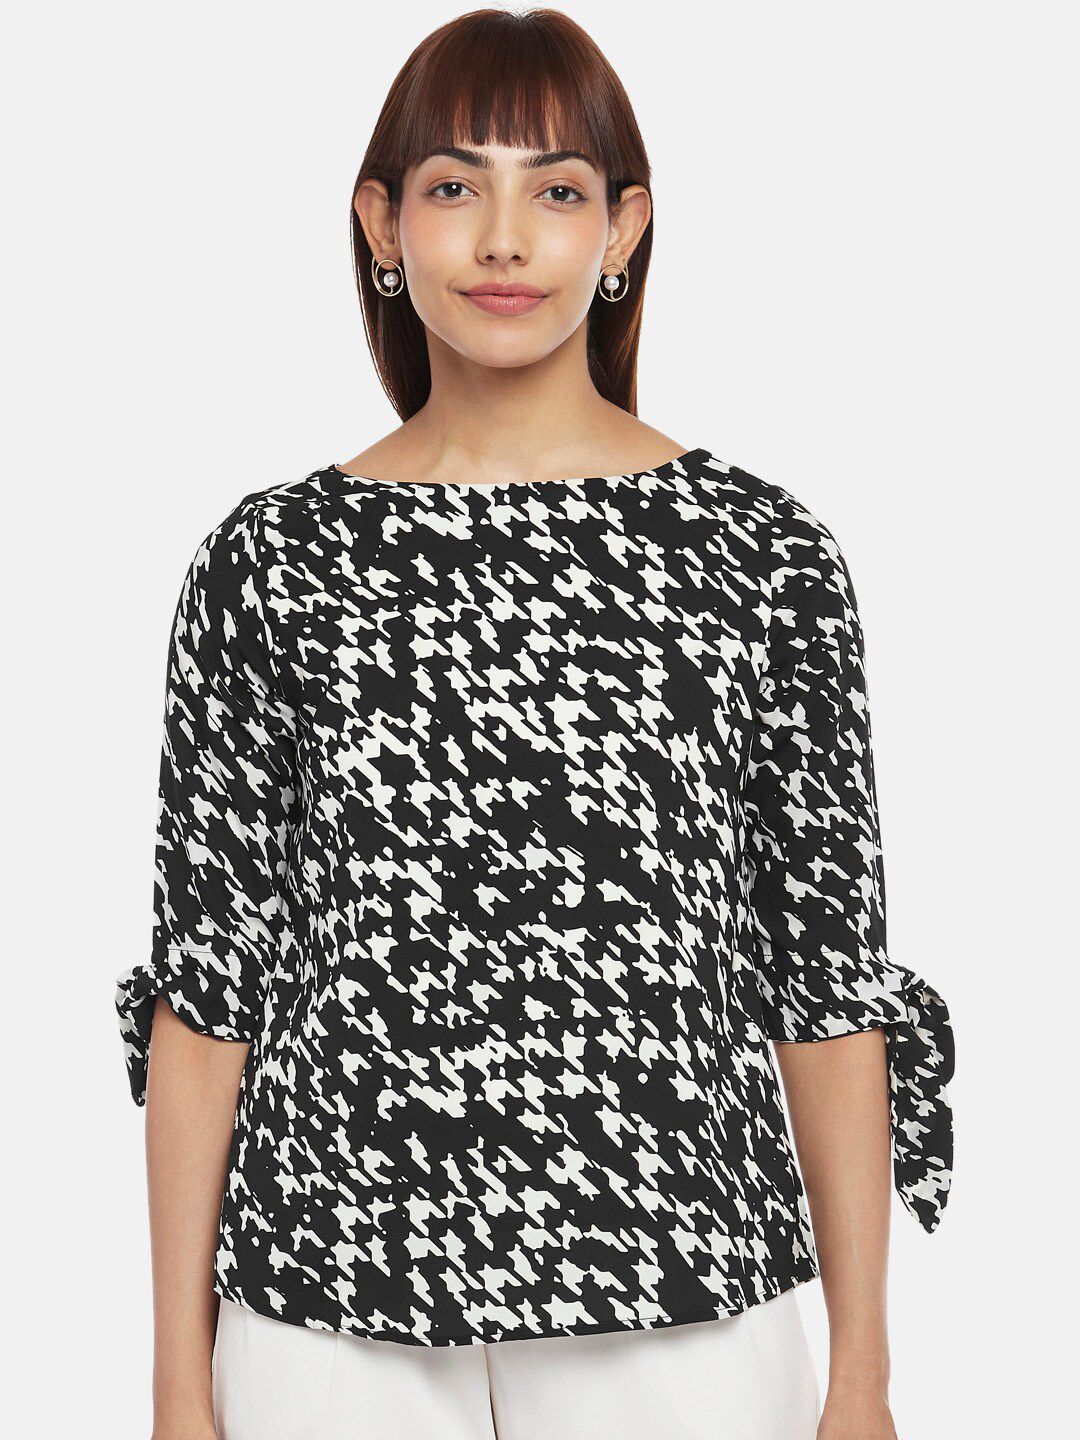 Annabelle by Pantaloons Women Black & White Printed Polyester Top Price in India